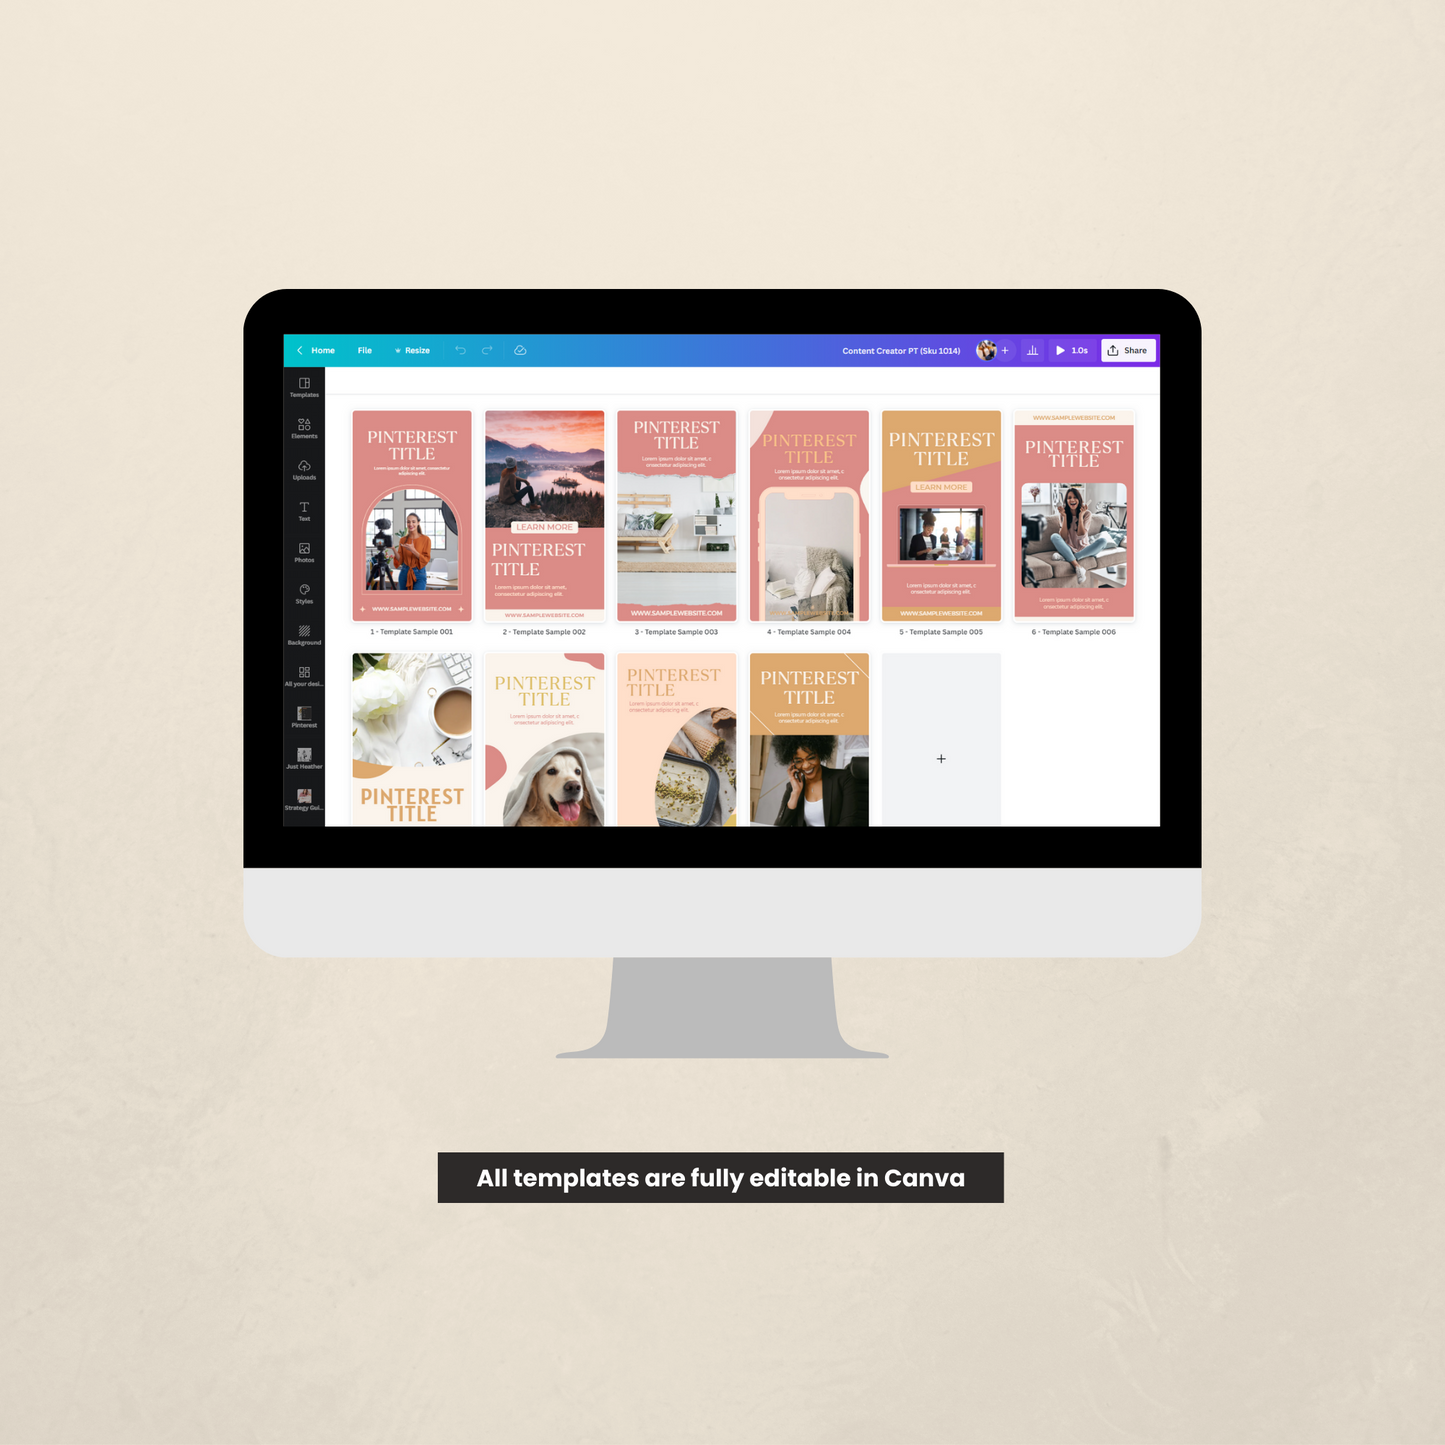 Content Creator Pinterest Pin Templates for Canva V2